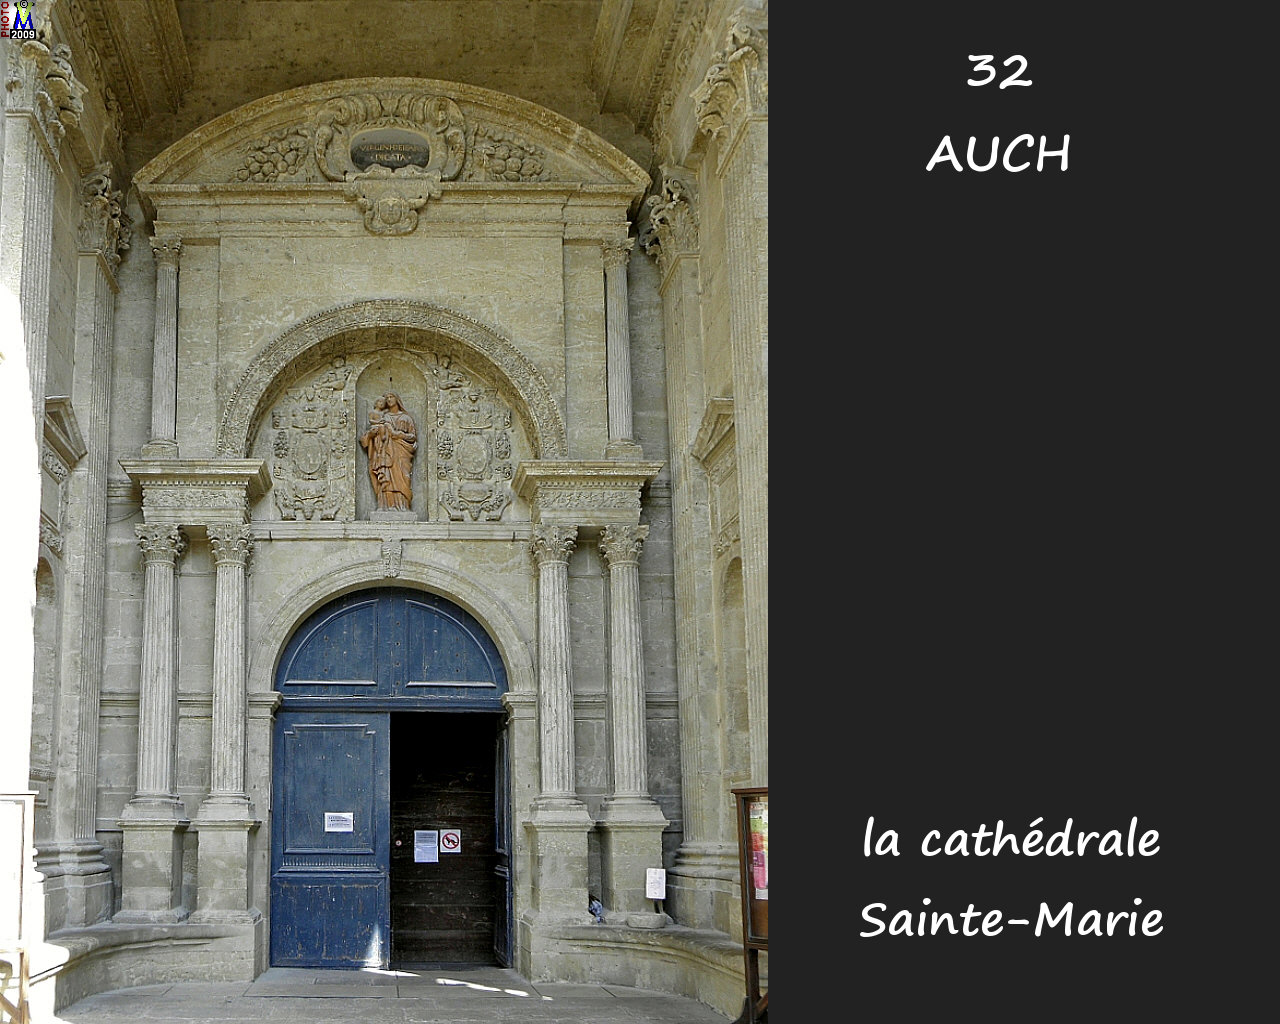 32AUCH_cathedrale_112.jpg